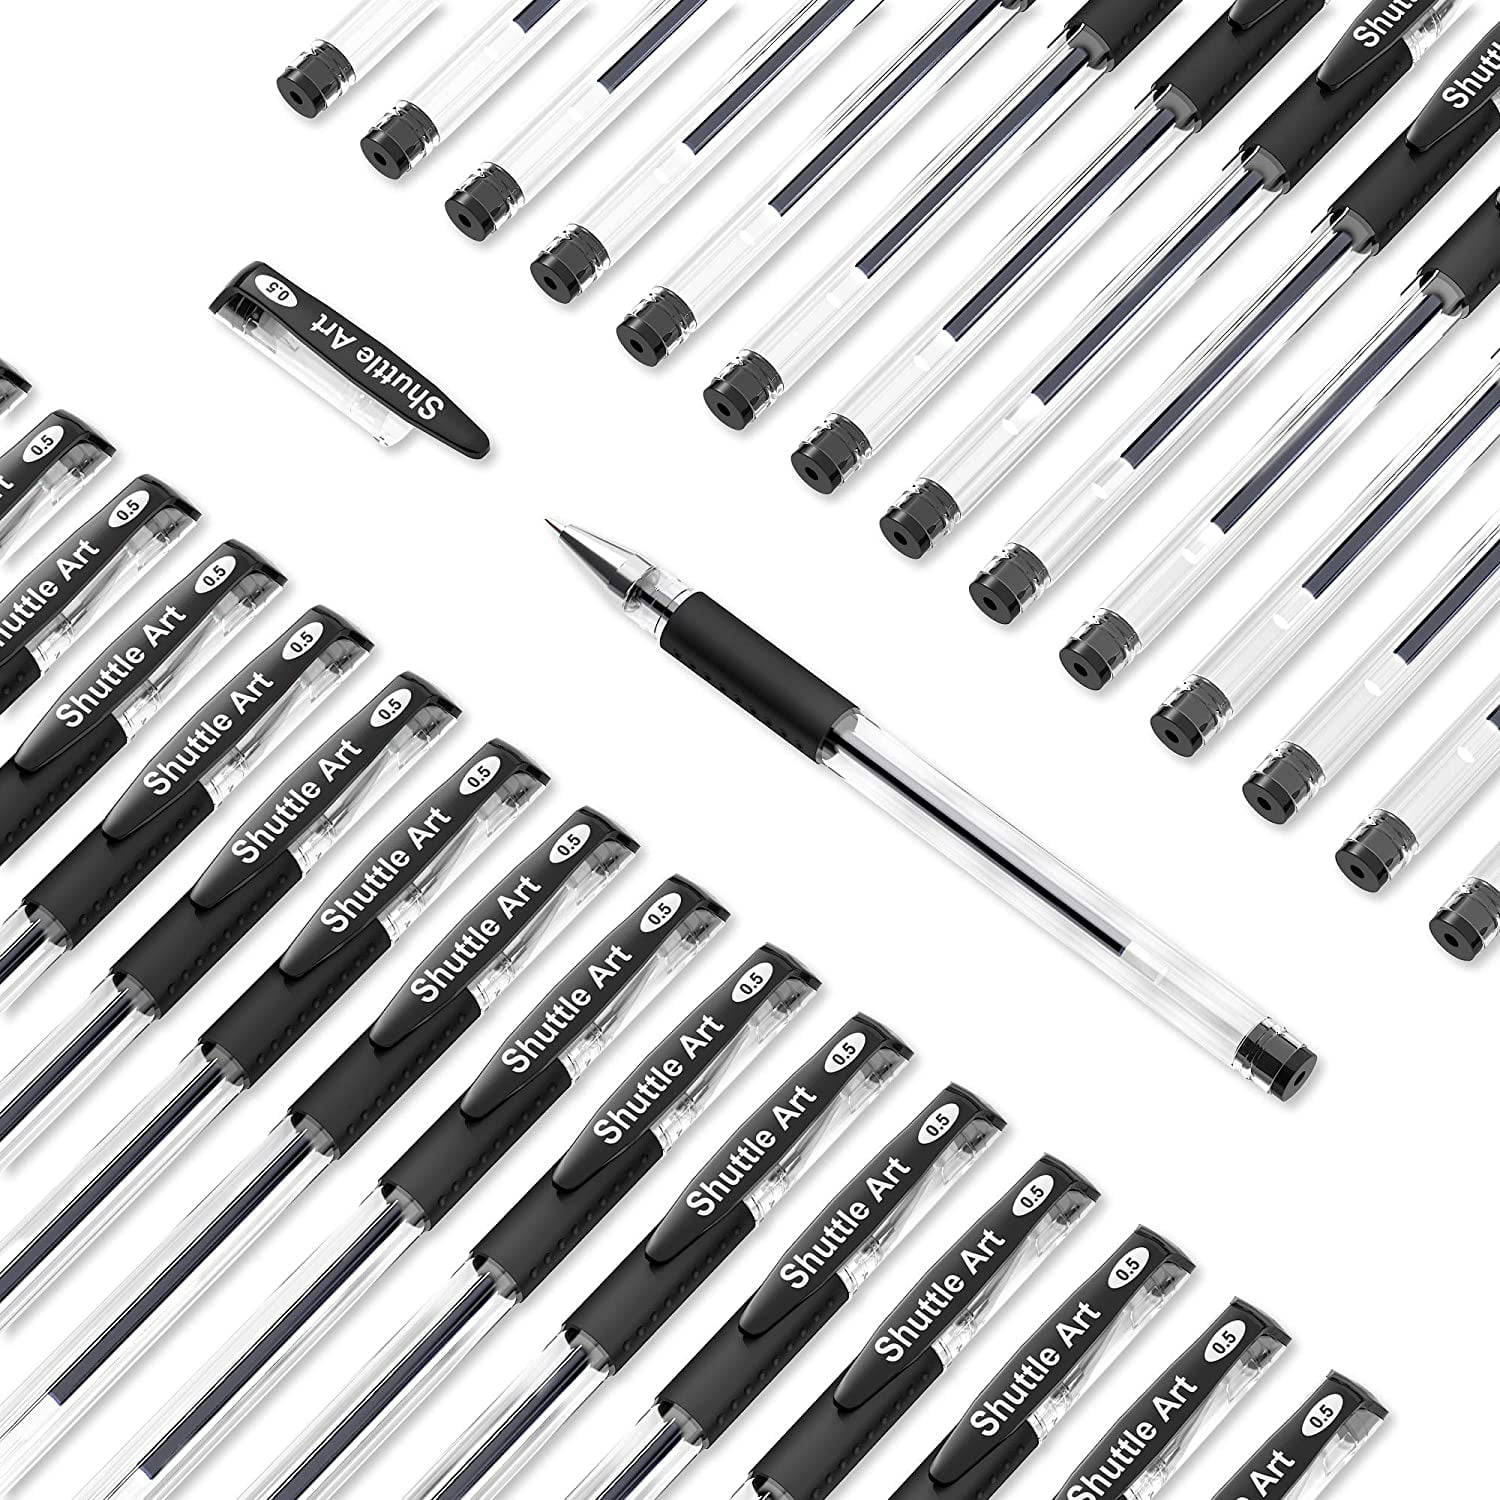  100 Pack Gel Ink Rollerball Pens Bulk Pen Business Pens 0.5 mm  Bold Point Ink Pens Cool Pens Roller Ball Pens Fine Point for Office,  School, Writing, Taking Notes, Sketching (Black